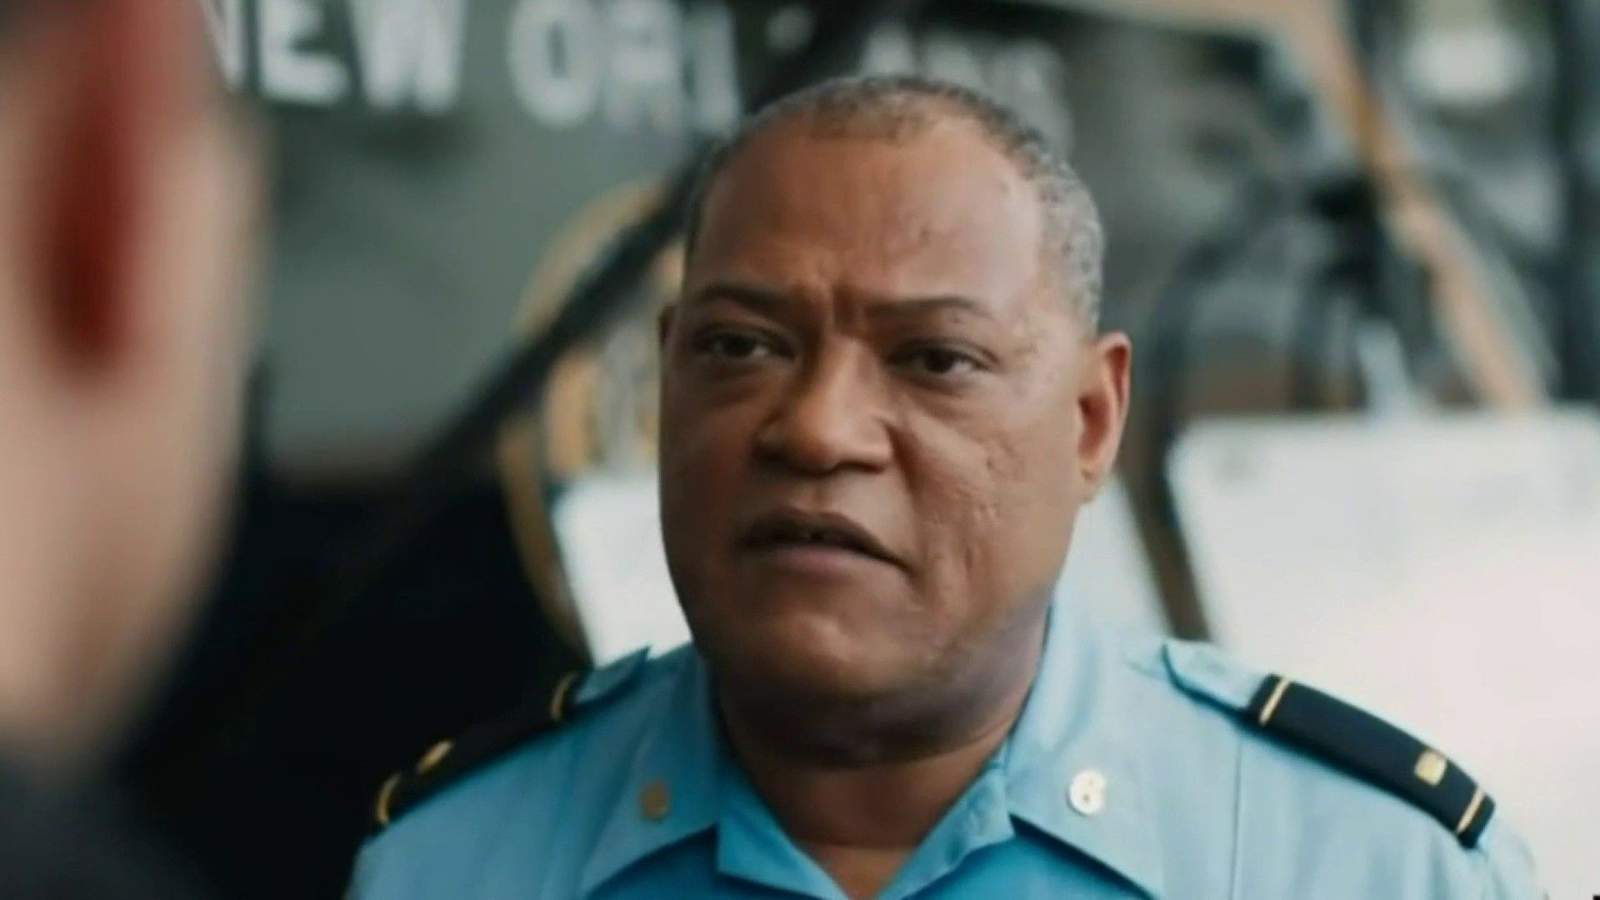 Laurence Fishburne shares what we can expect in his new series #FreeRayshawn